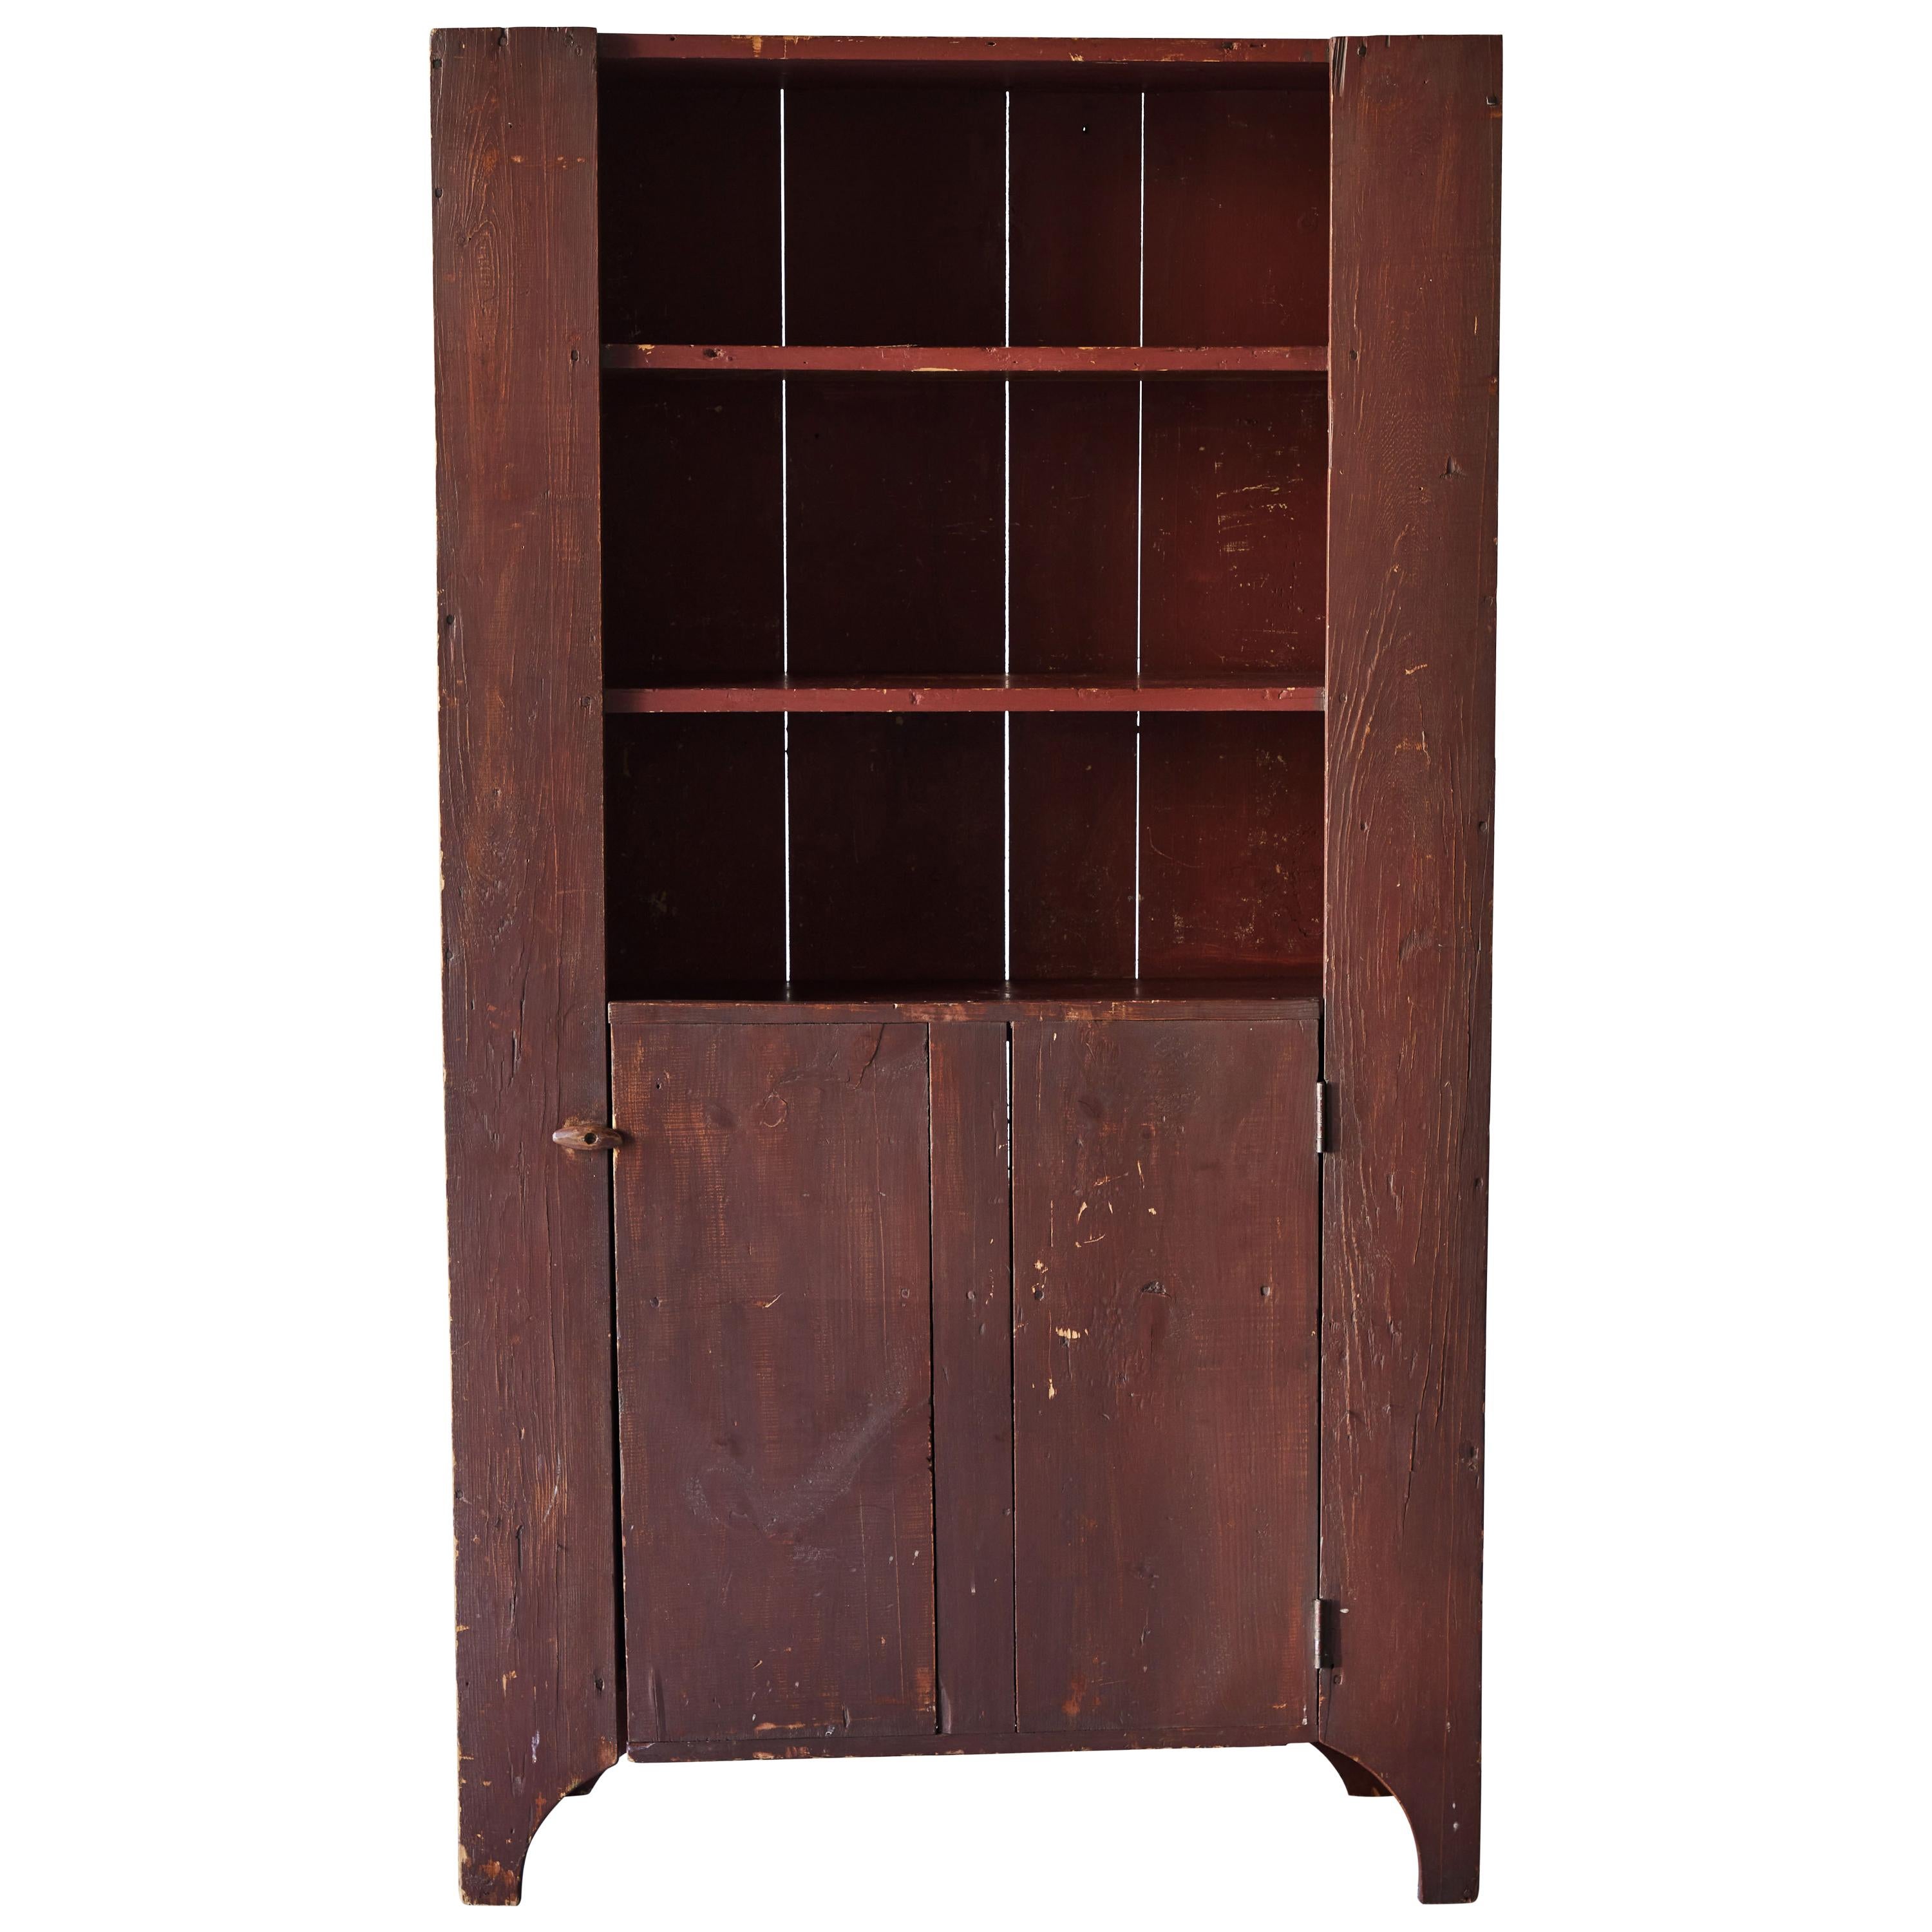 Early American Open-Front Red Painted Cupboard